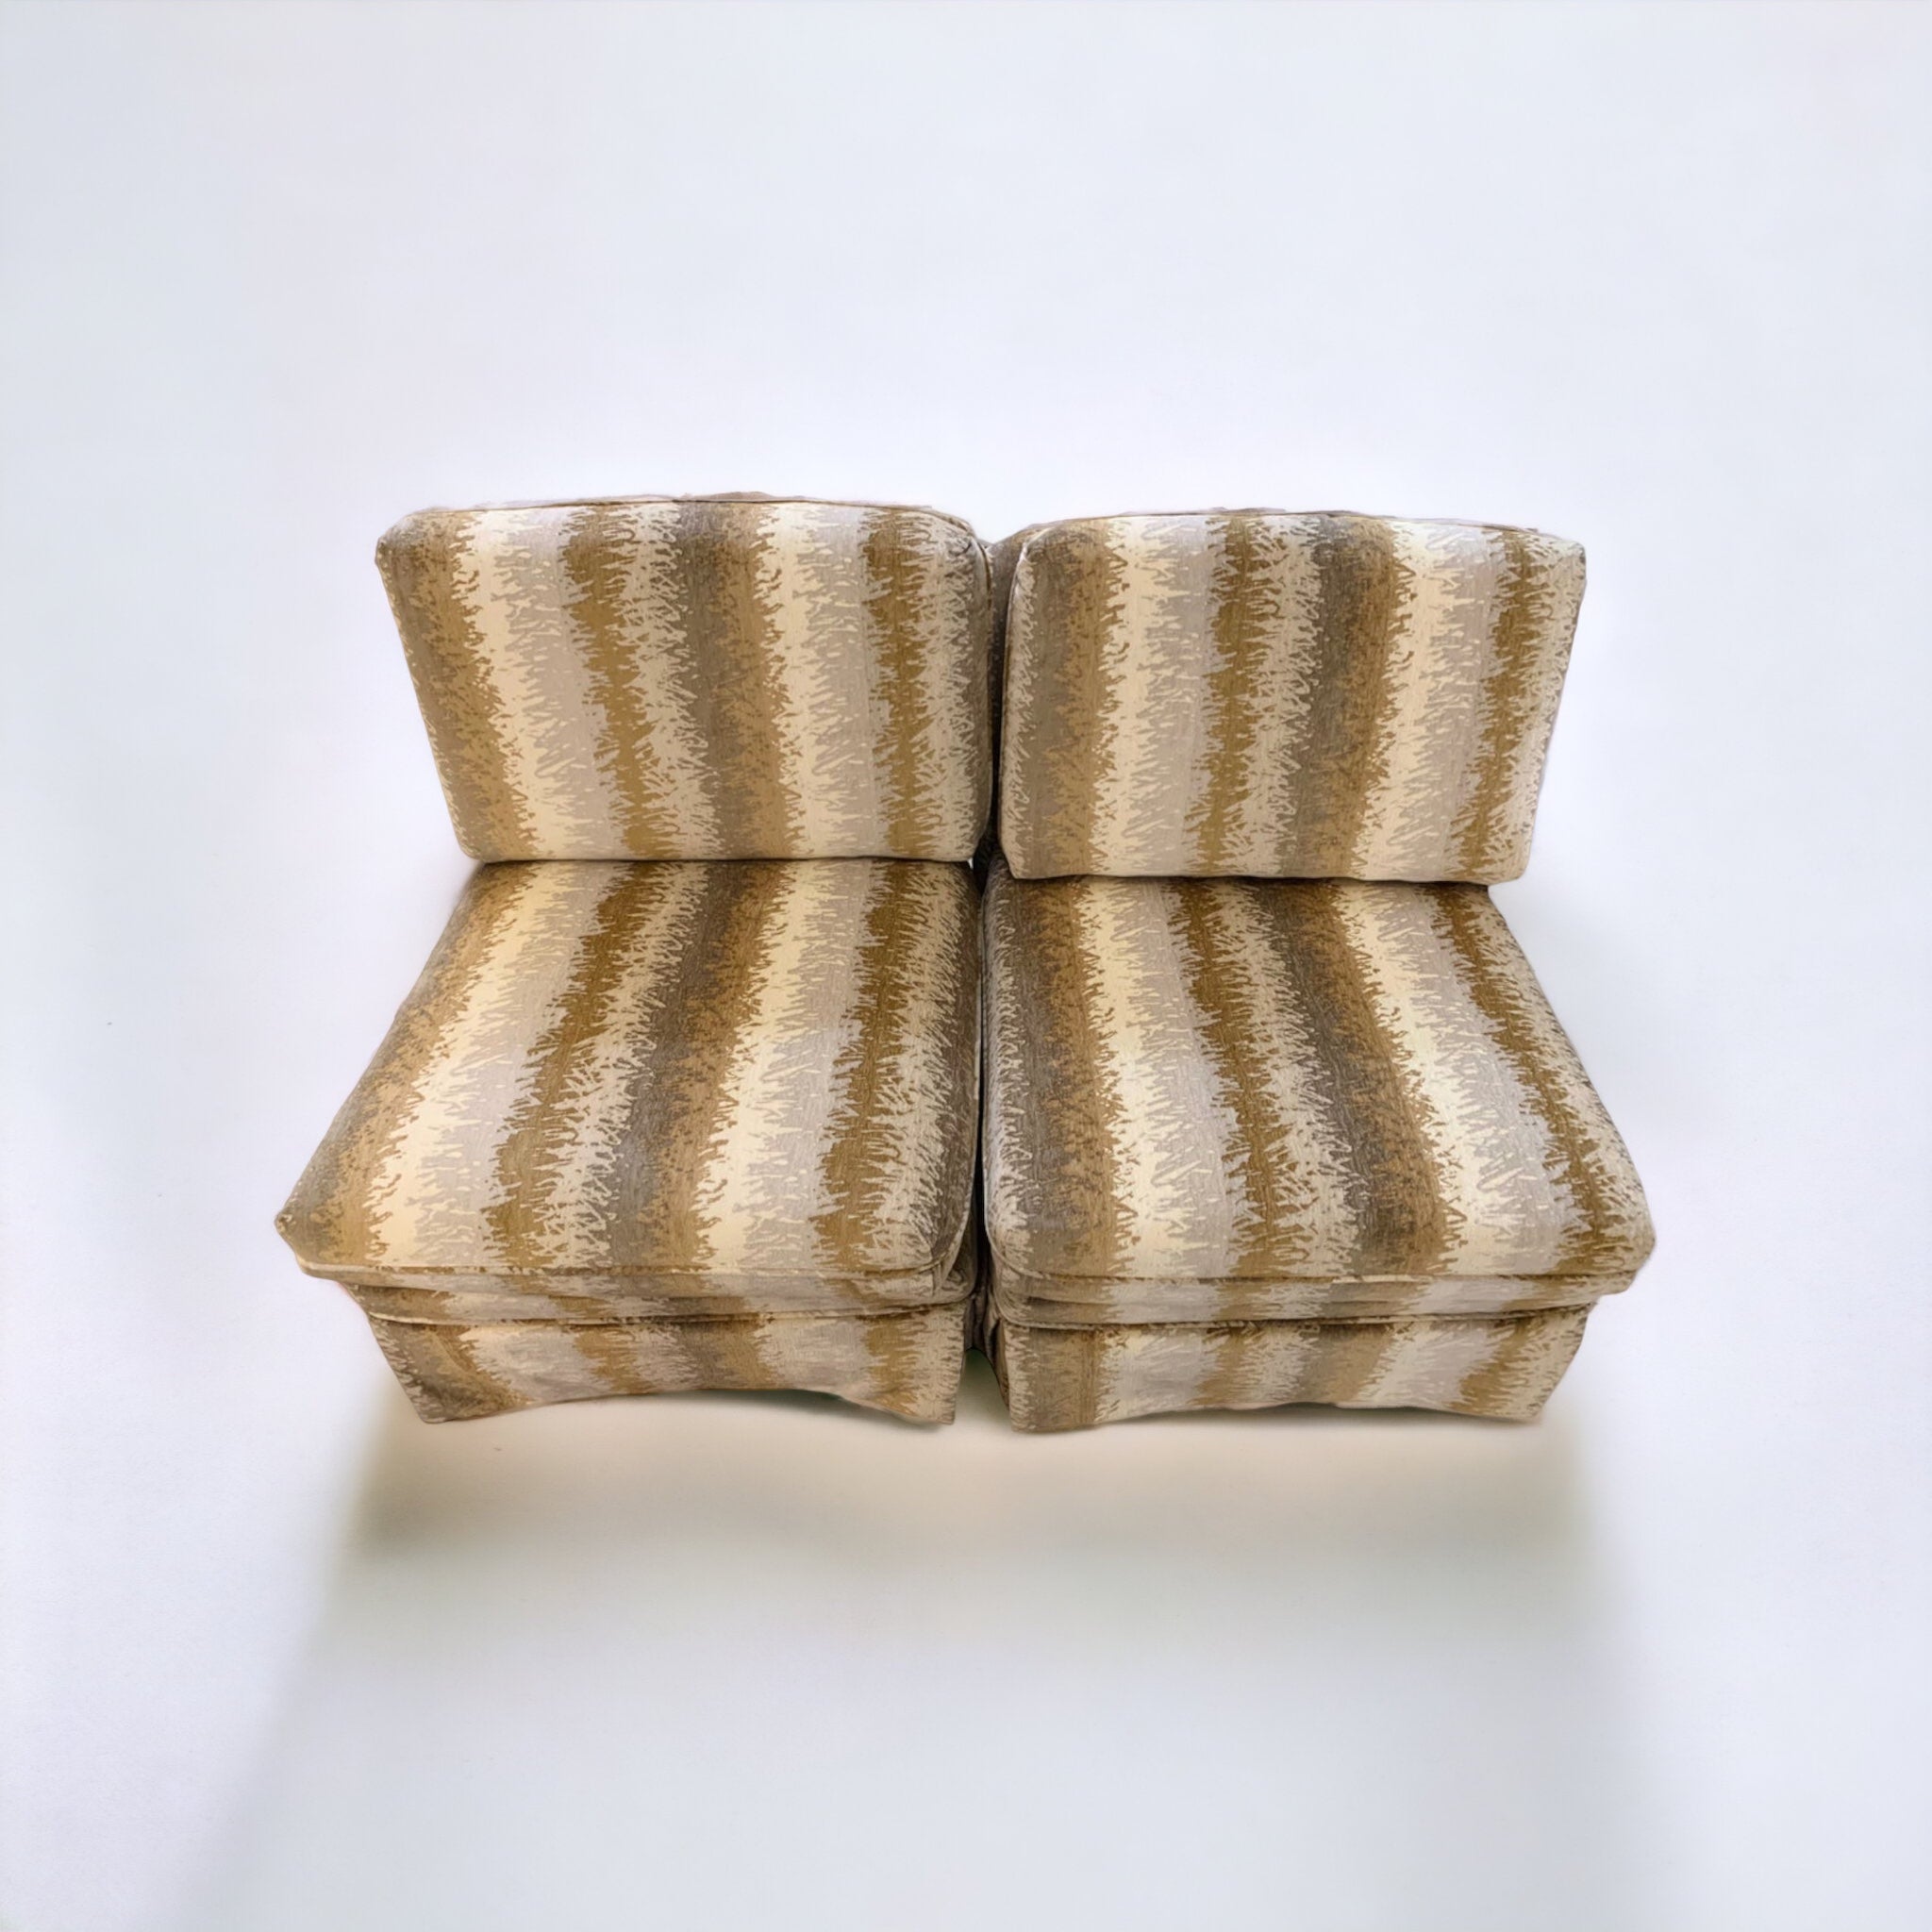 1970s Vintage Oversized Slipper Chairs (Pair)